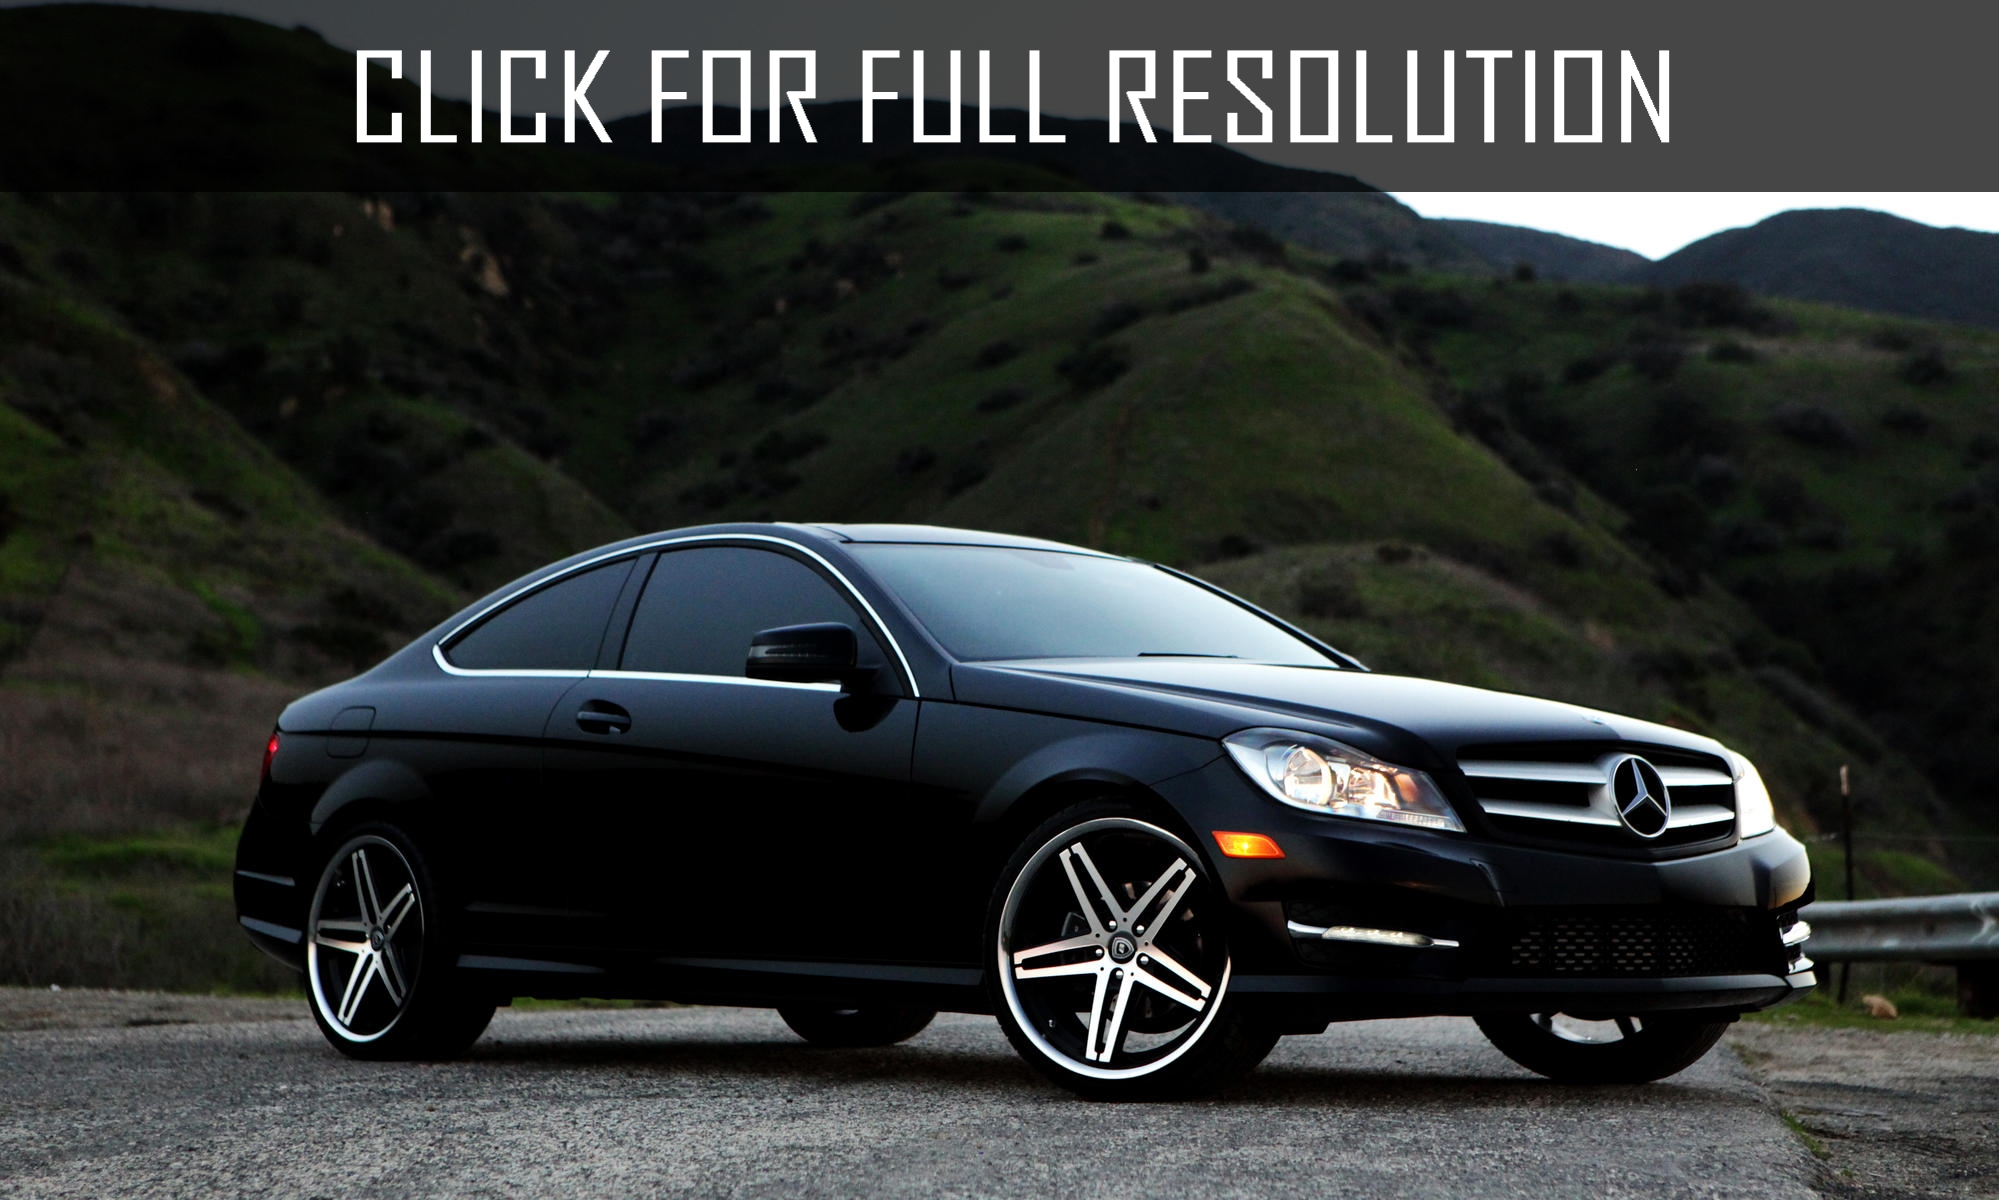 2010 Mercedes Benz C Class Coupe best image gallery #4/22 ...